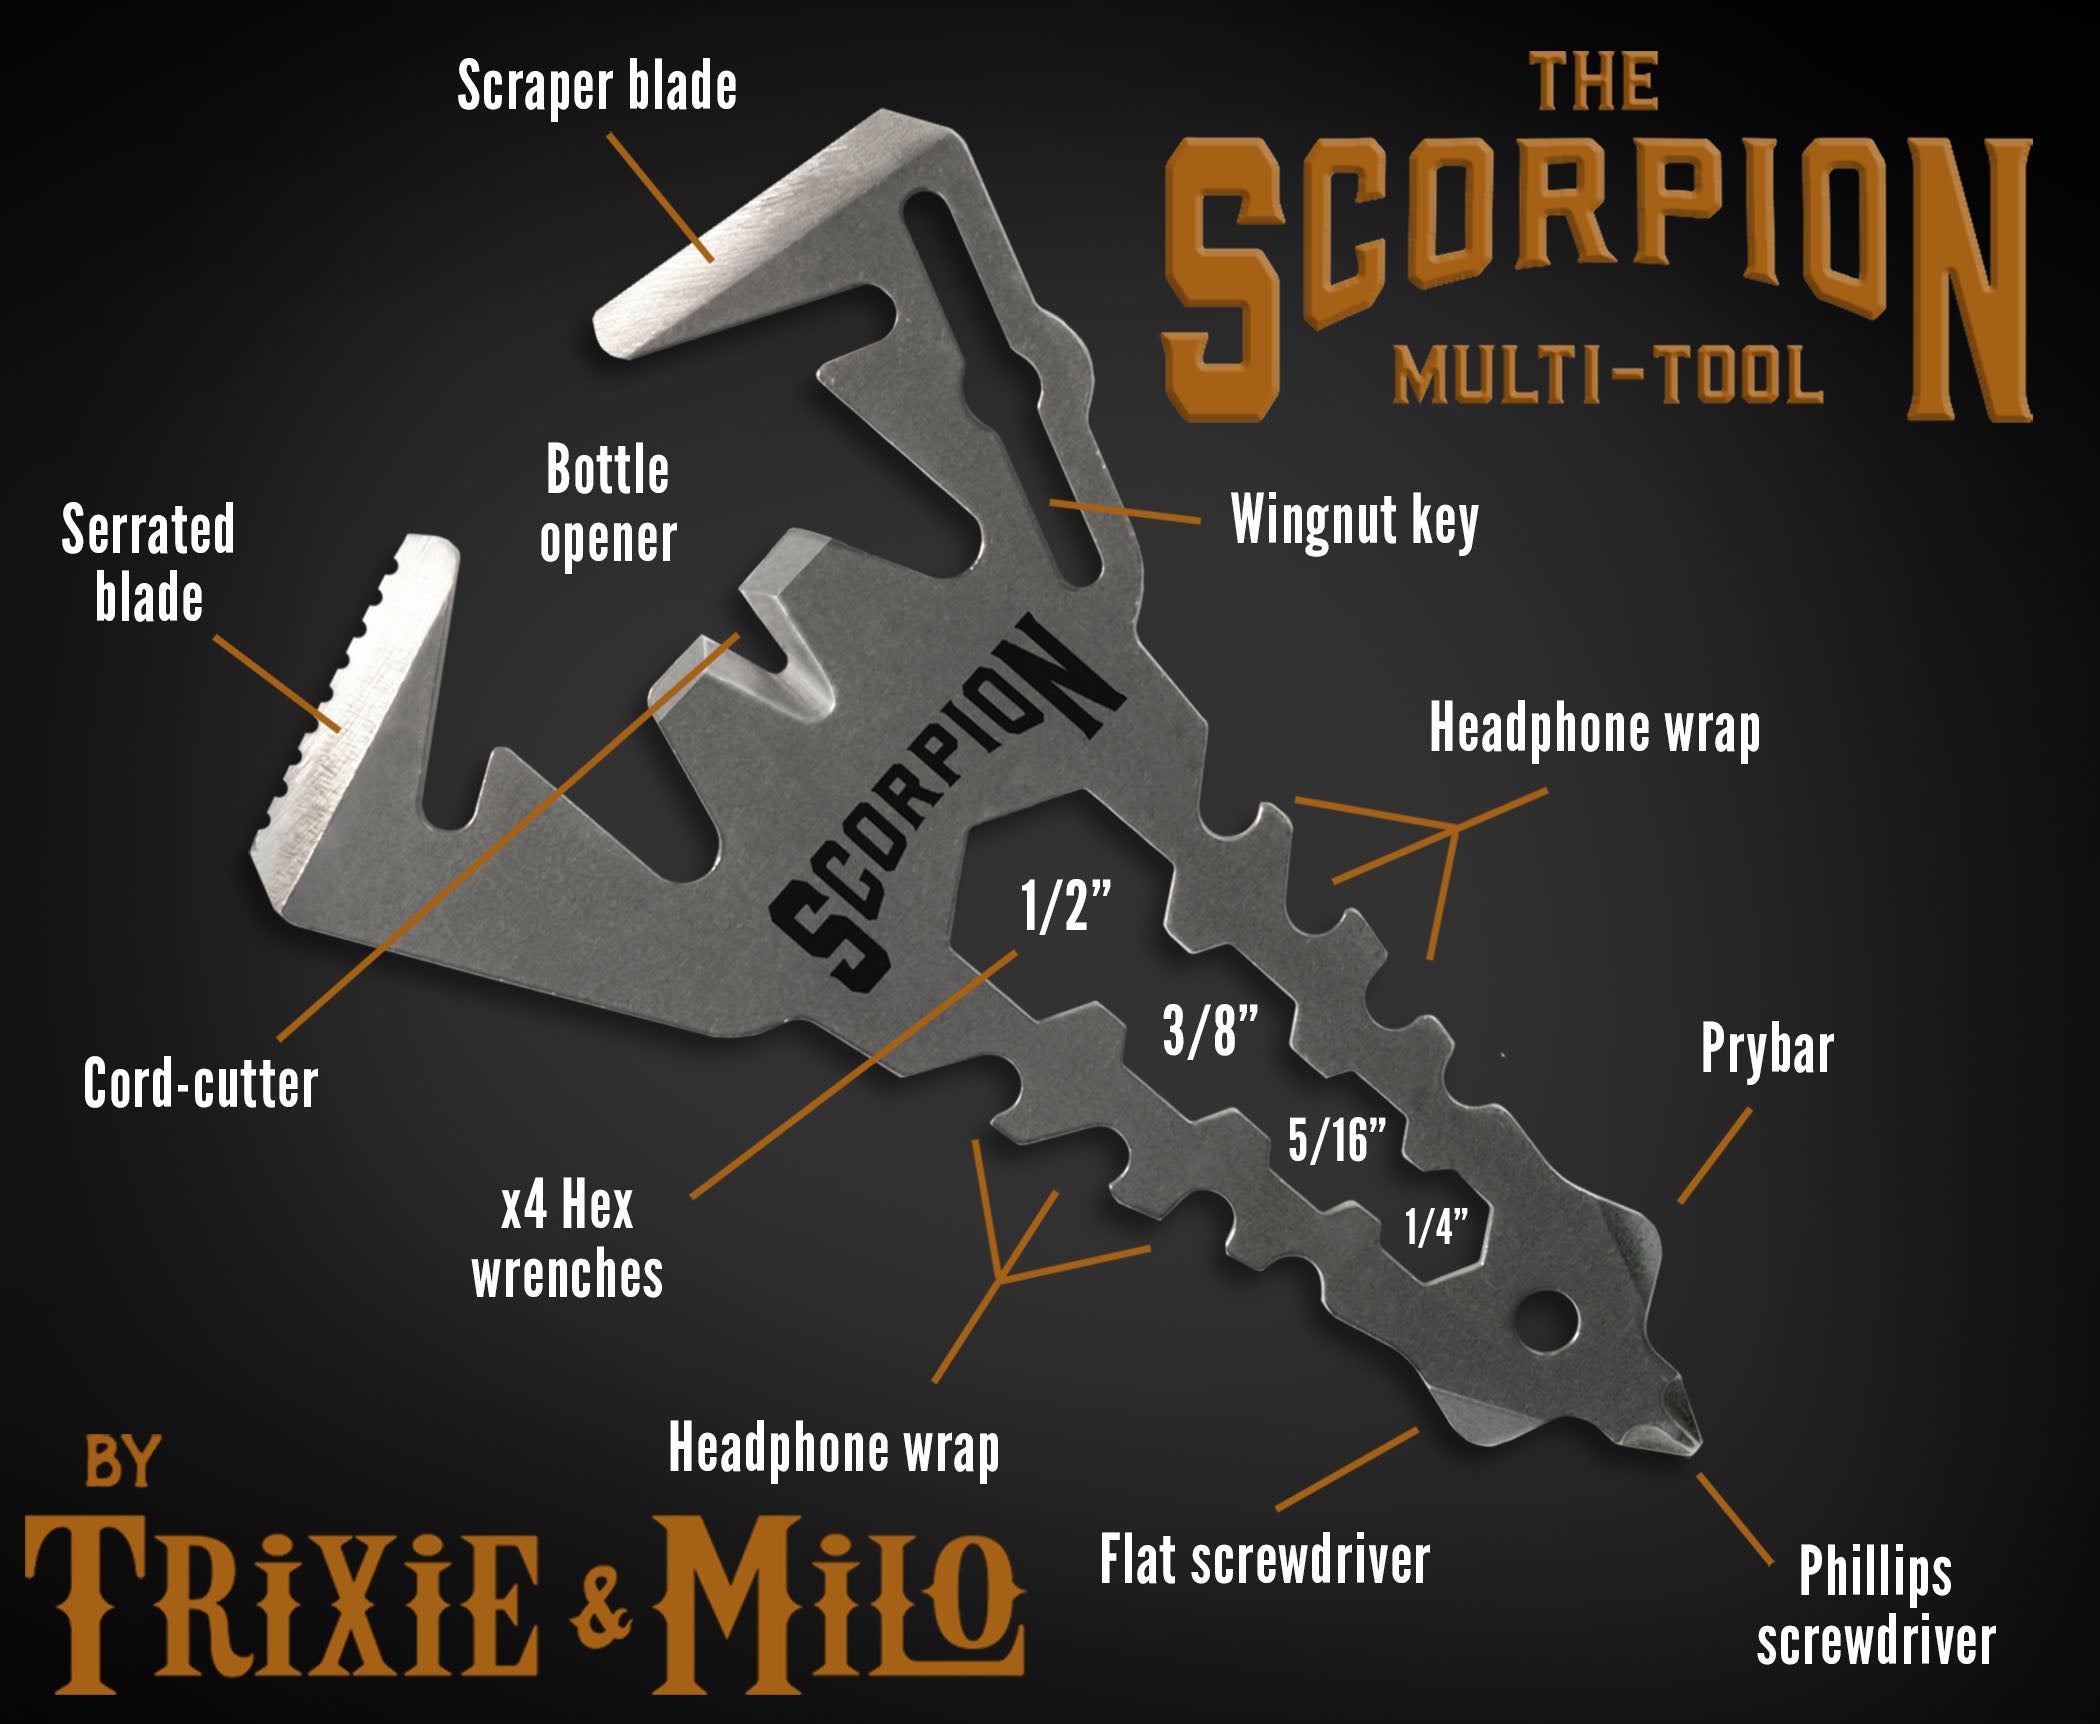 The Scorpion Multifunction Tool Portable and pocket sized preparedness. Great as everyday carry for DIY projects, camping, backpacking, glamping or hiking! 